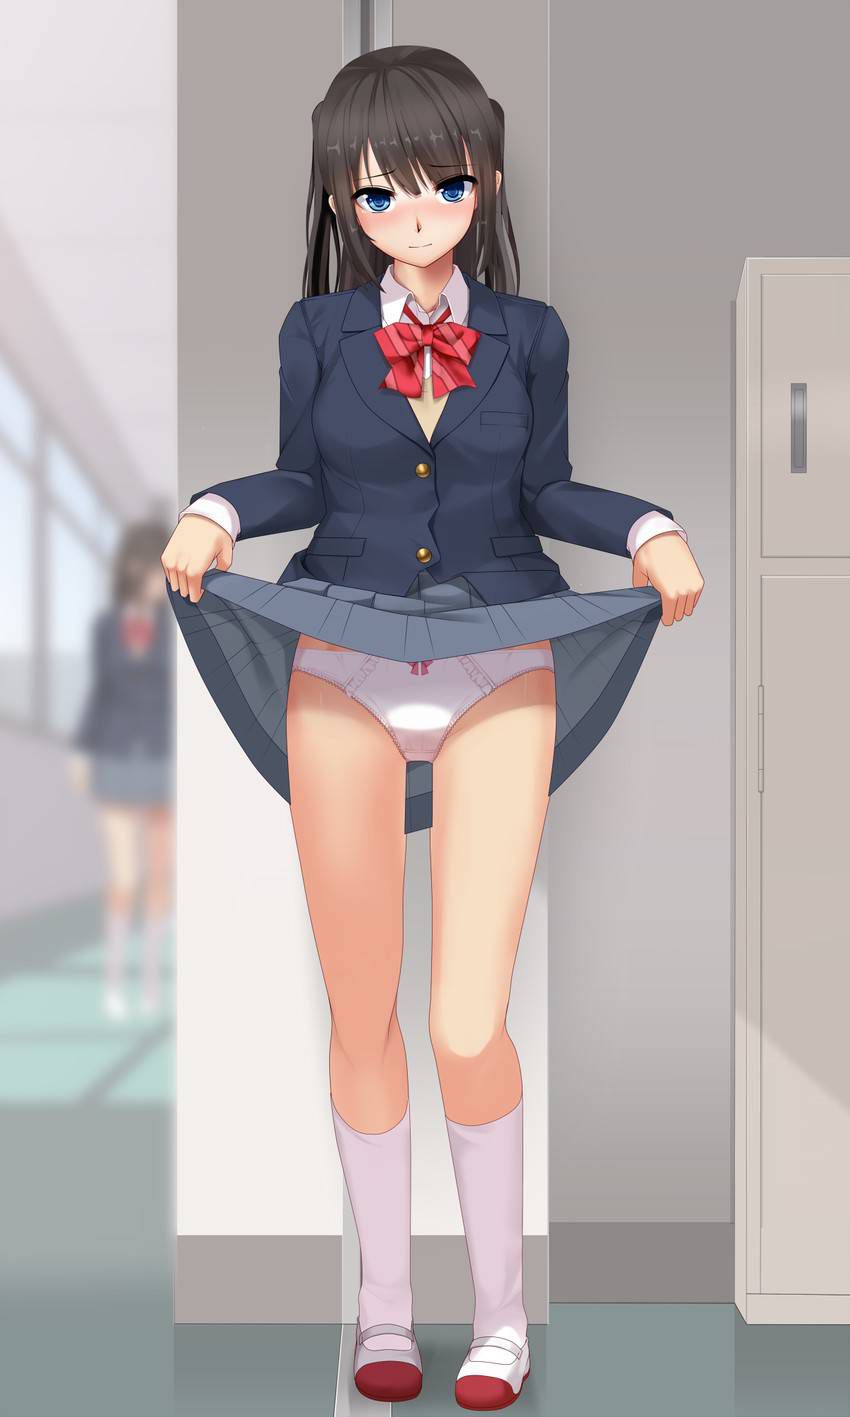 [Dress inspection] Secondary erotic images of high school girls to show pants in skirt crazy 2